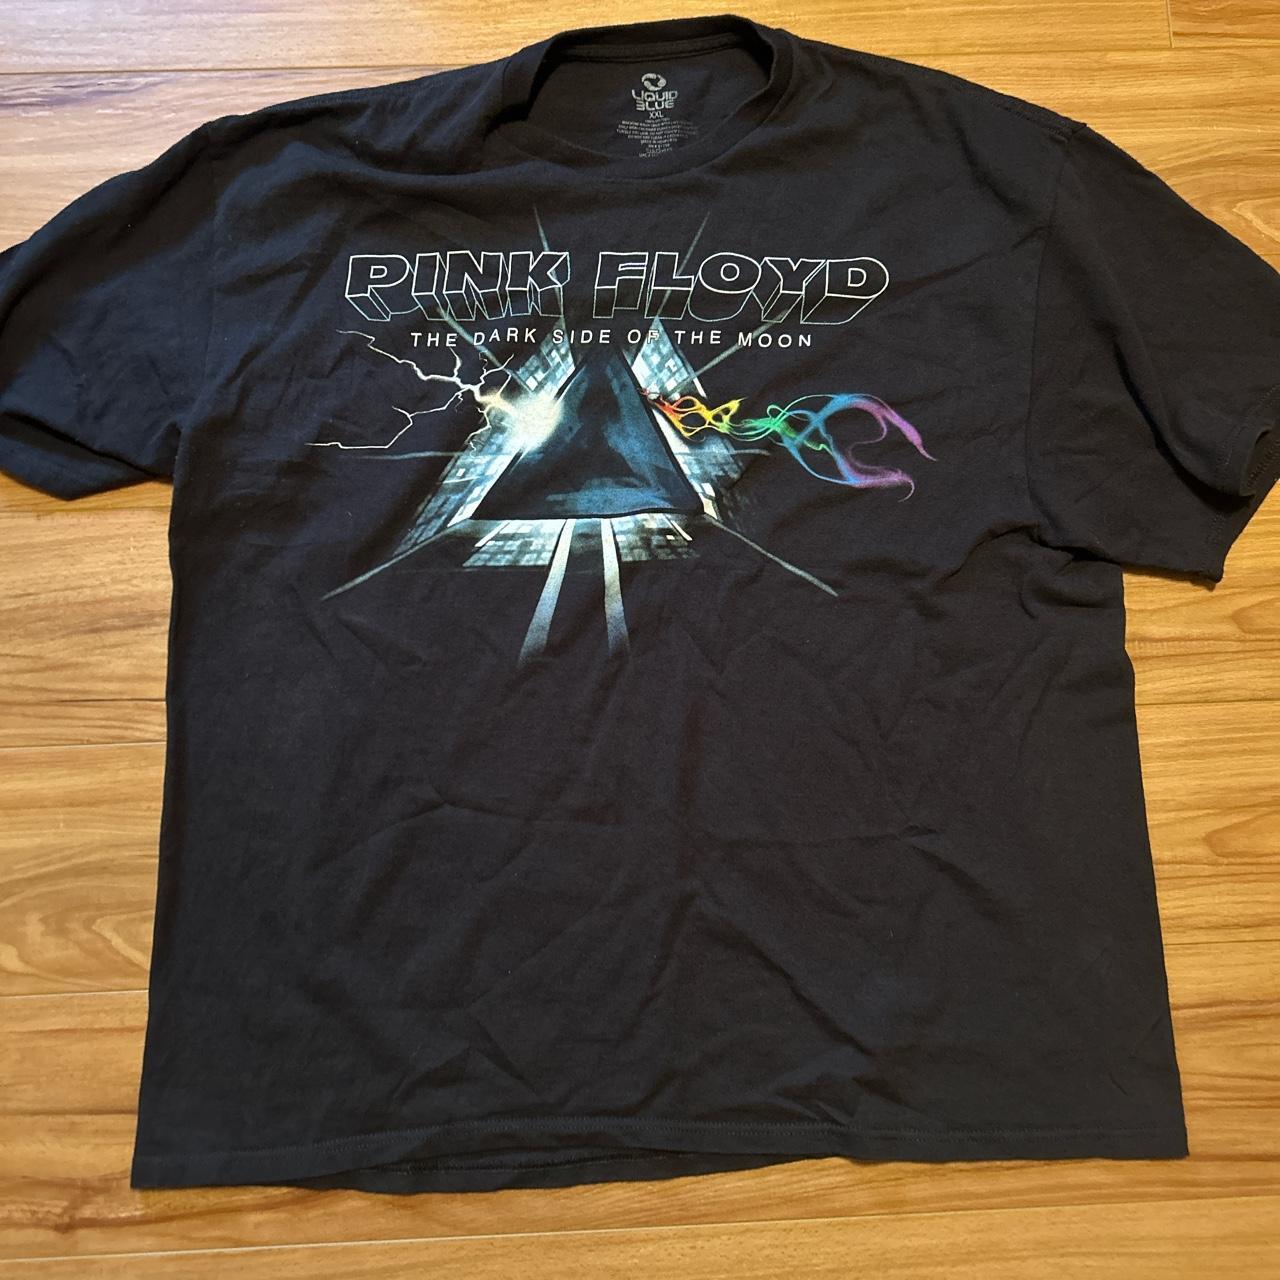 👕 Pink Floyd Shirt| Size XXL 👕 Never worn and in... - Depop